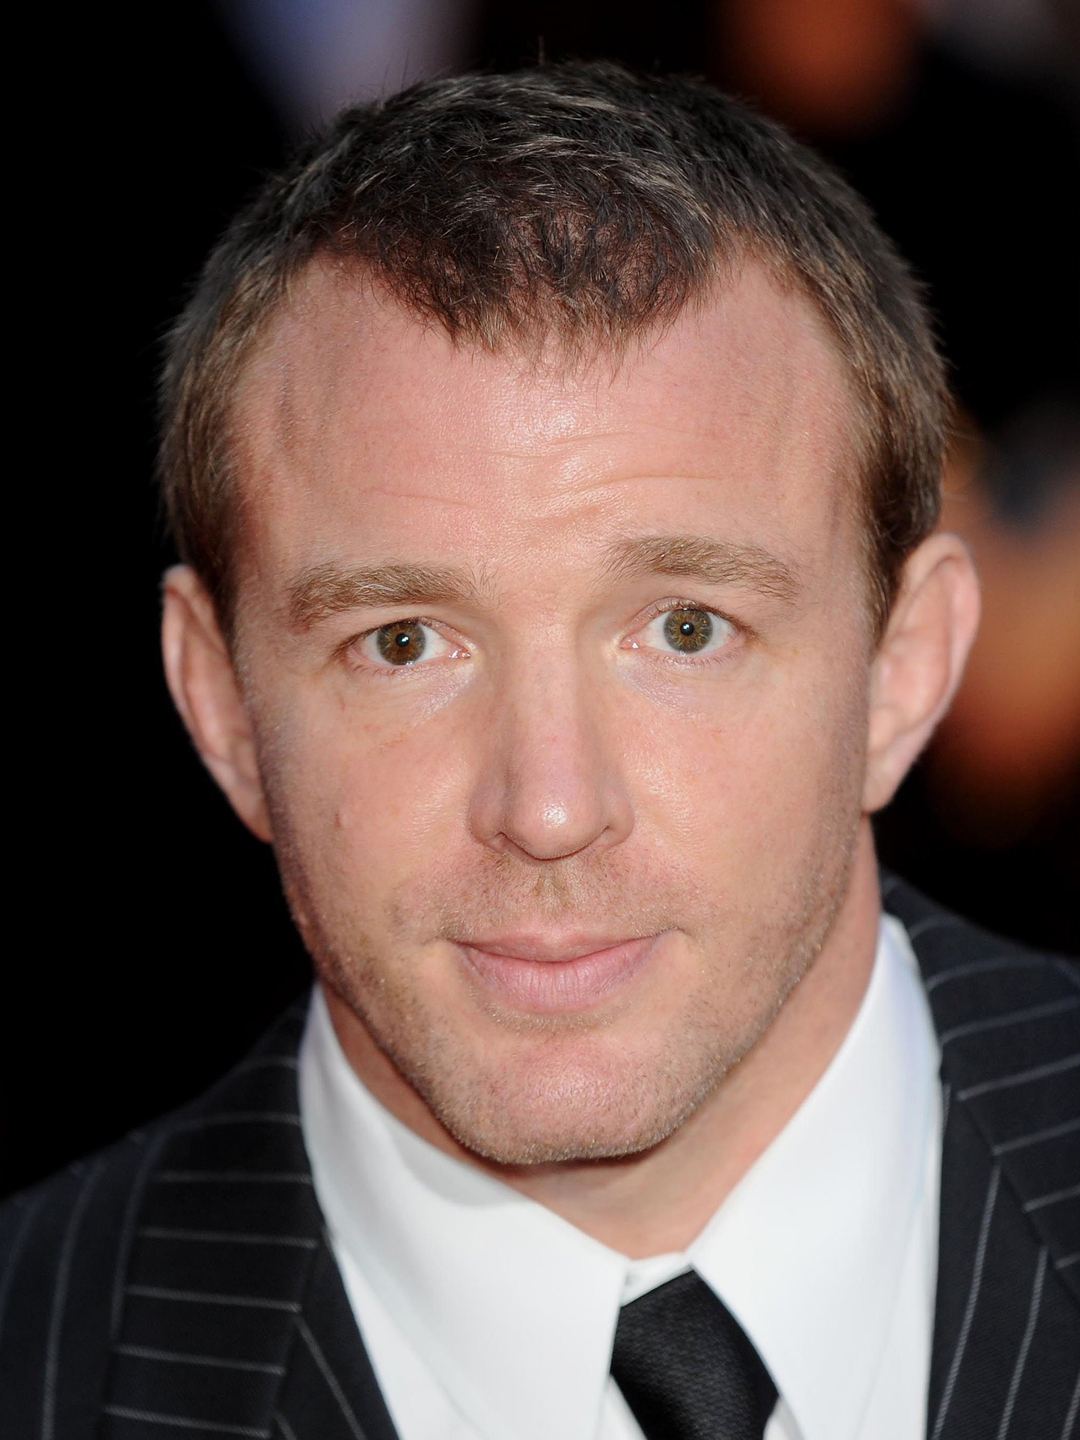 Guy Ritchie does he have kids